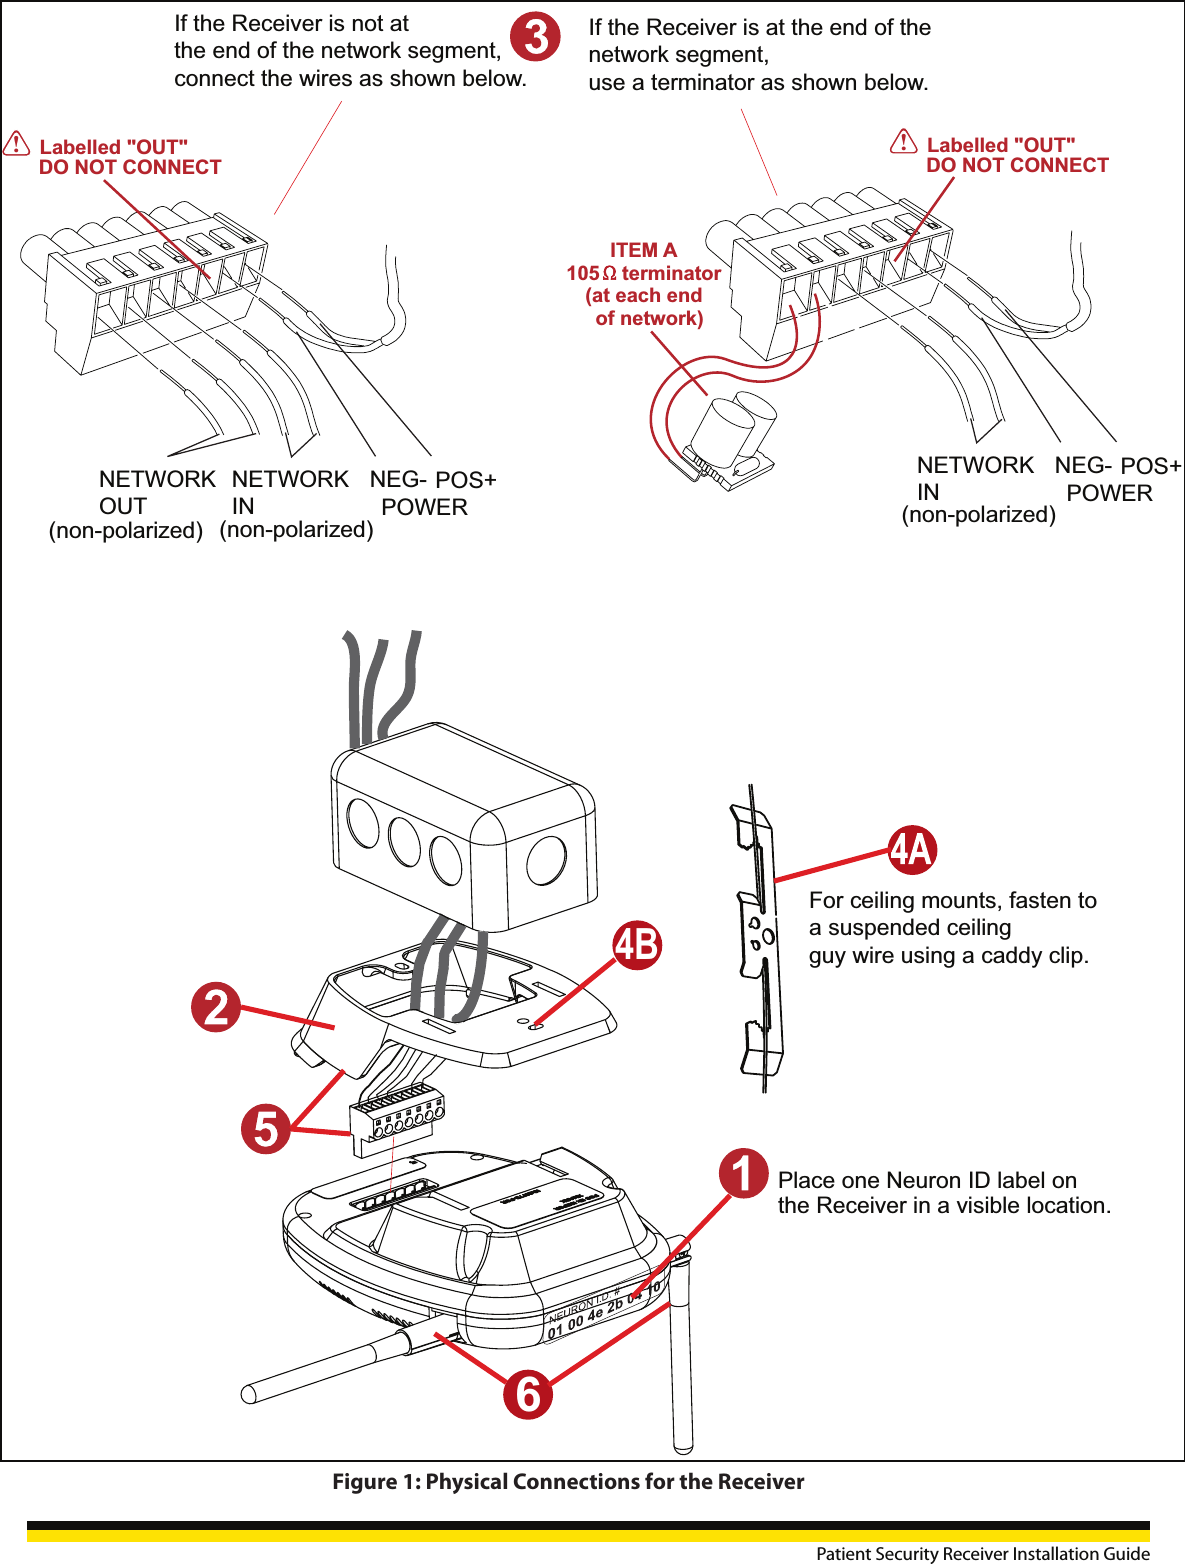 Figure 1: Physical Connections for the ReceiverPlace one Neuron ID label onthe Receiver in a visible location. For ceiling mounts, fasten to a suspended ceilingguy wire using a caddy clip.4B6POS+NEG-POWERNETWORKINNETWORKOUTIf the Receiver is at the end of thenetwork segment,use a terminator as shown below.!Labelled &quot;OUT&quot;DO NOT CONNECTPOS+NEG-POWERNETWORKIN!ITEM A105    terminator(at each end  of network)Labelled &quot;OUT&quot;DO NOT CONNECTIf the Receiver is not at the end of the network segment,connect the wires as shown below.(non-polarized)(non-polarized)(non-polarized)Patient Security Receiver Installation Guide